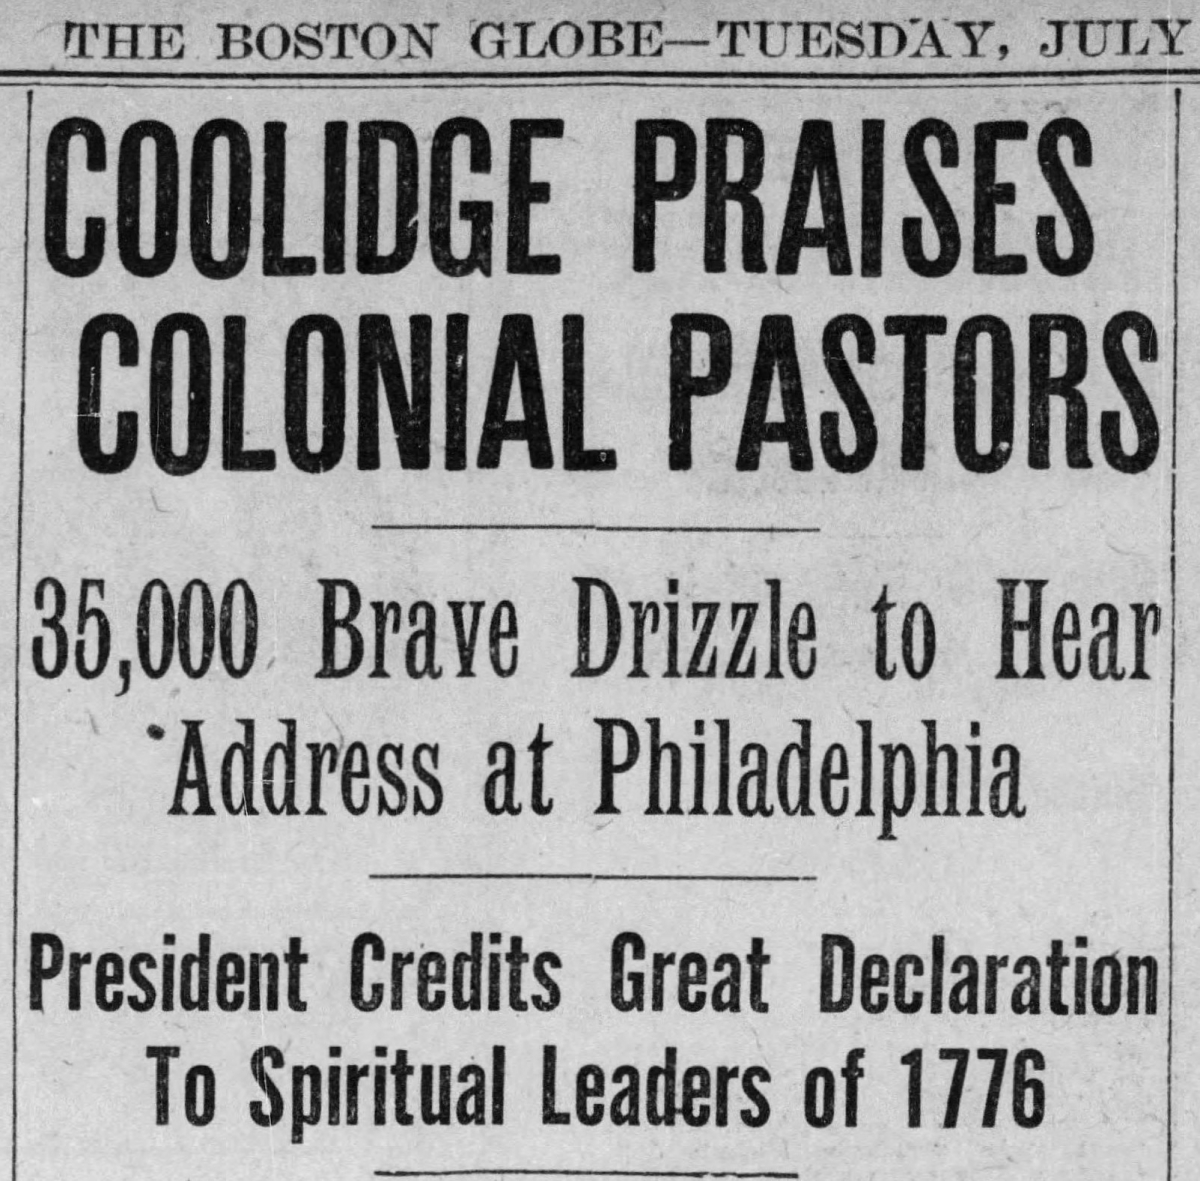 Headline for Coolidge's Visit to Philadelphia in July 6, 1926 Edition of the Boston Globe